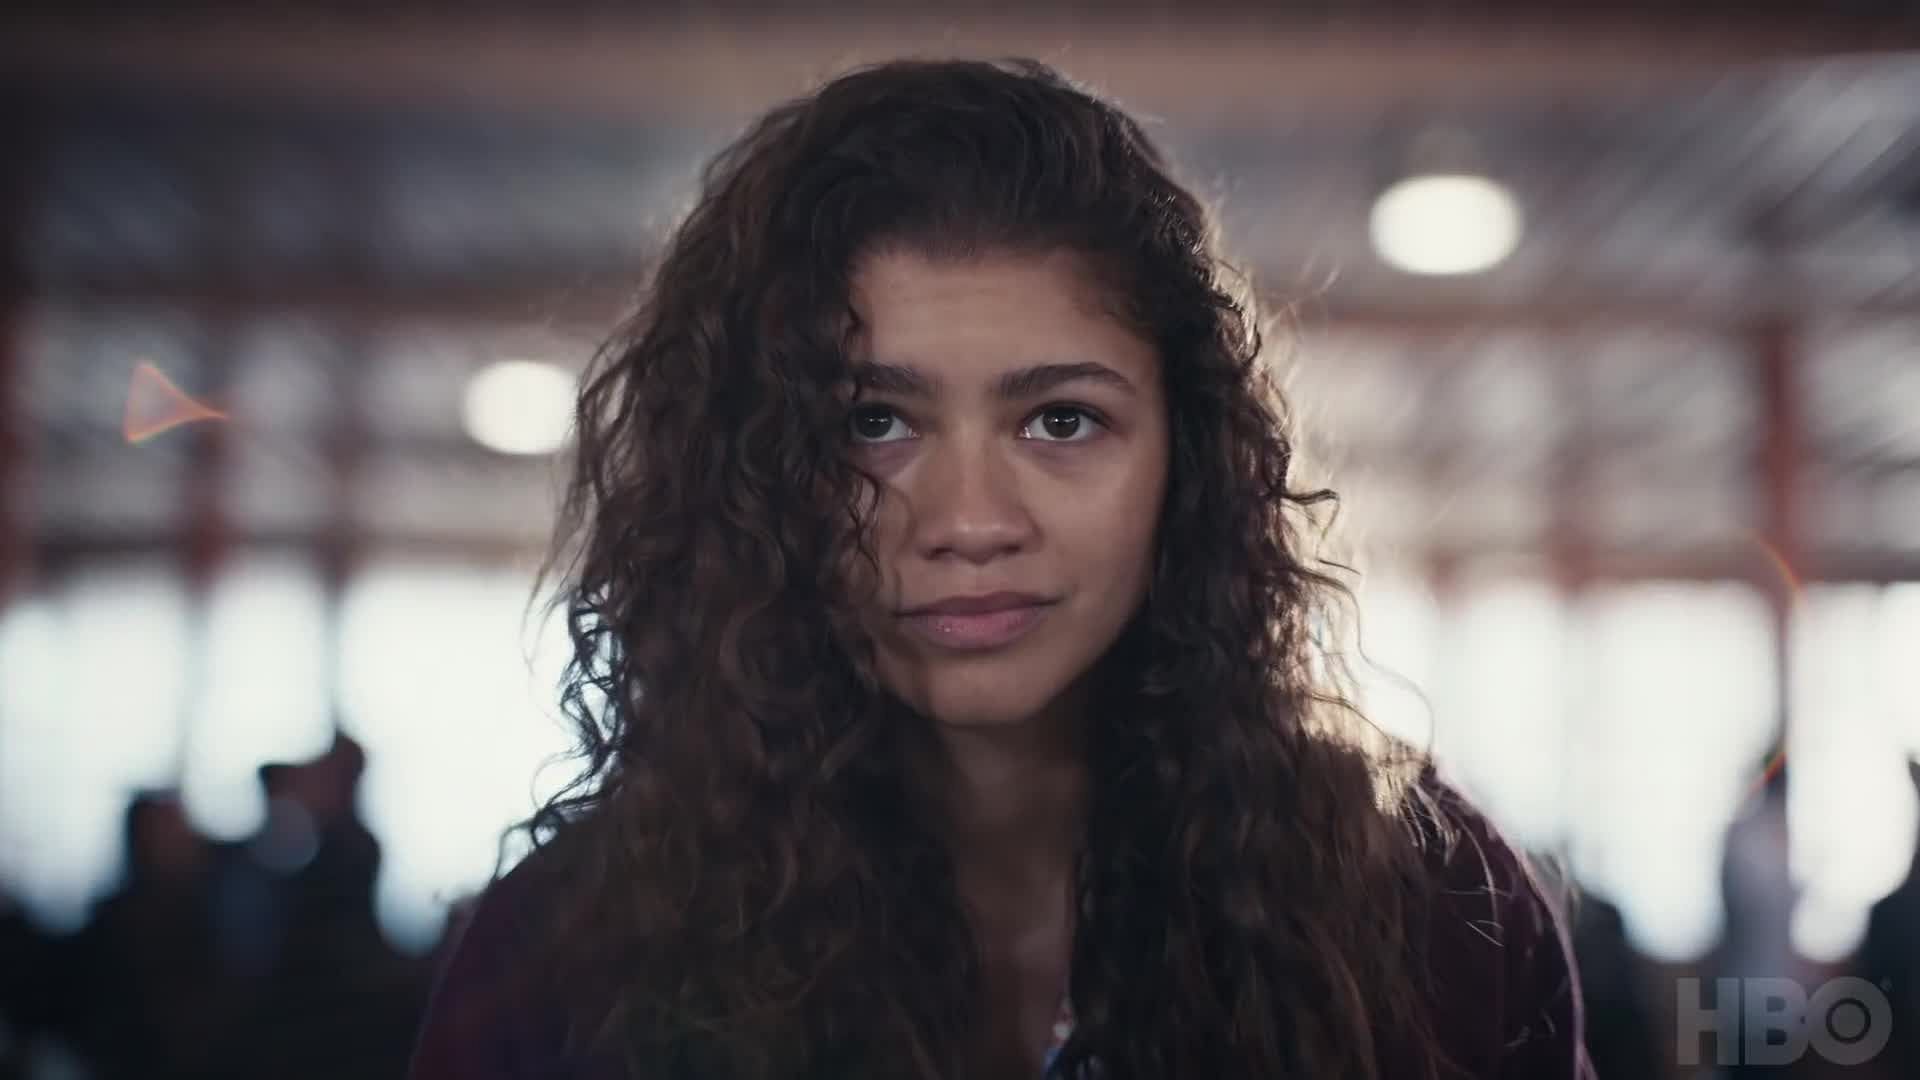 ''There'd be no show without her'': Fans thrilled as Zendaya reportedly ...